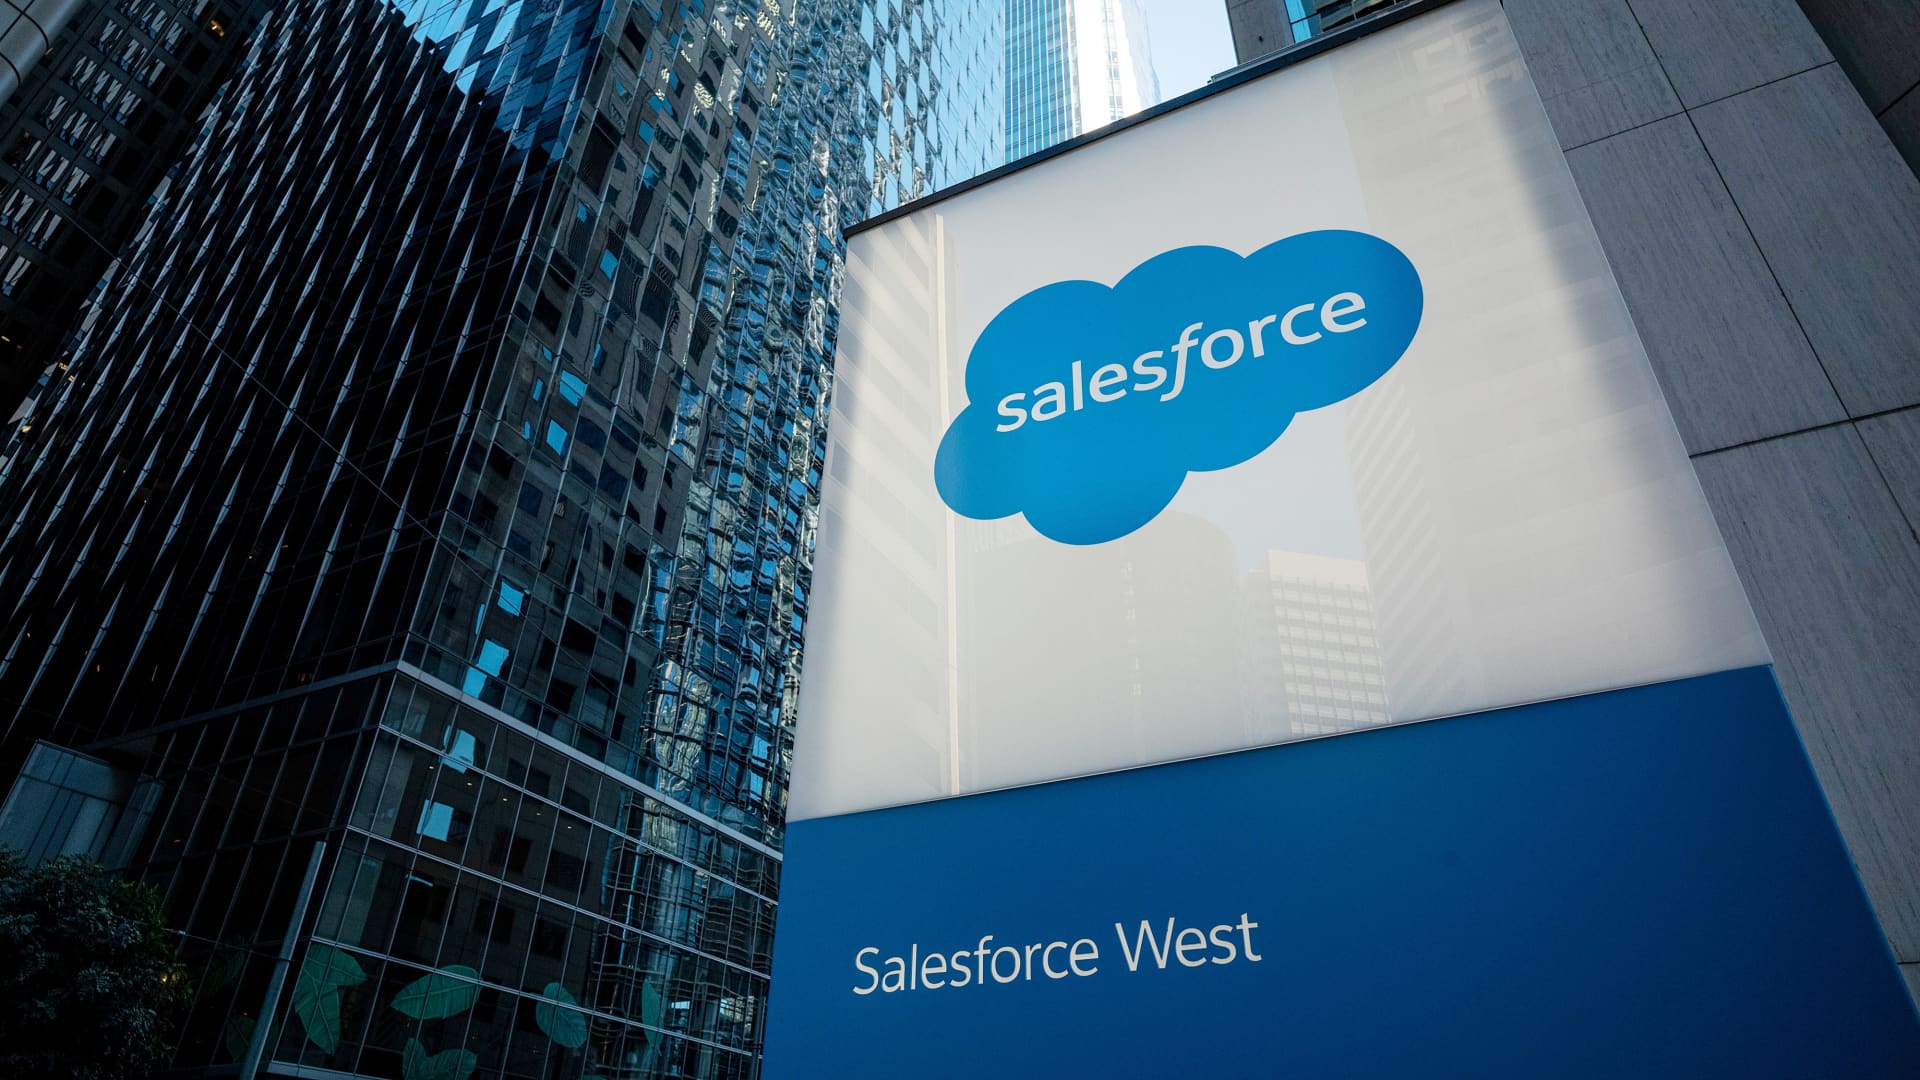 Salesforce is too cheap to ignore despite possible slower growth, JPMorgan says